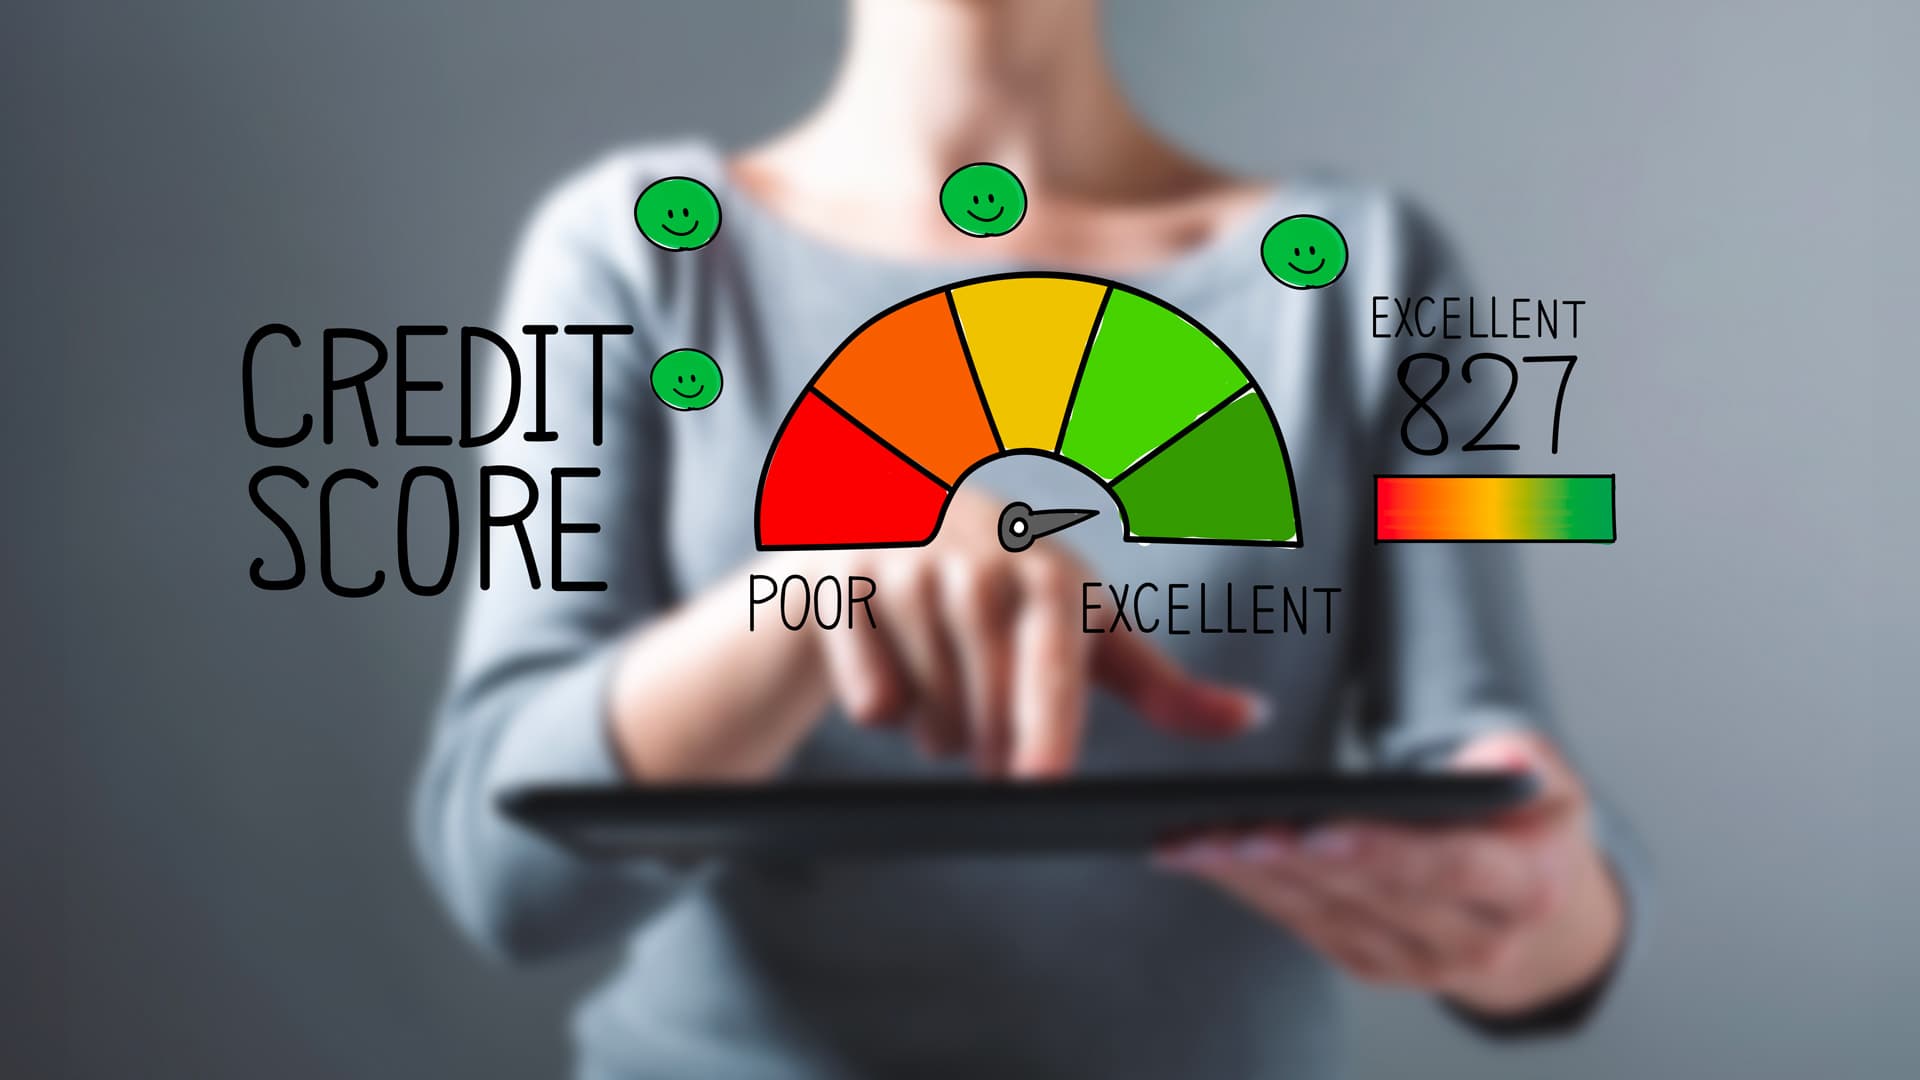 Maintain a good Credit Score